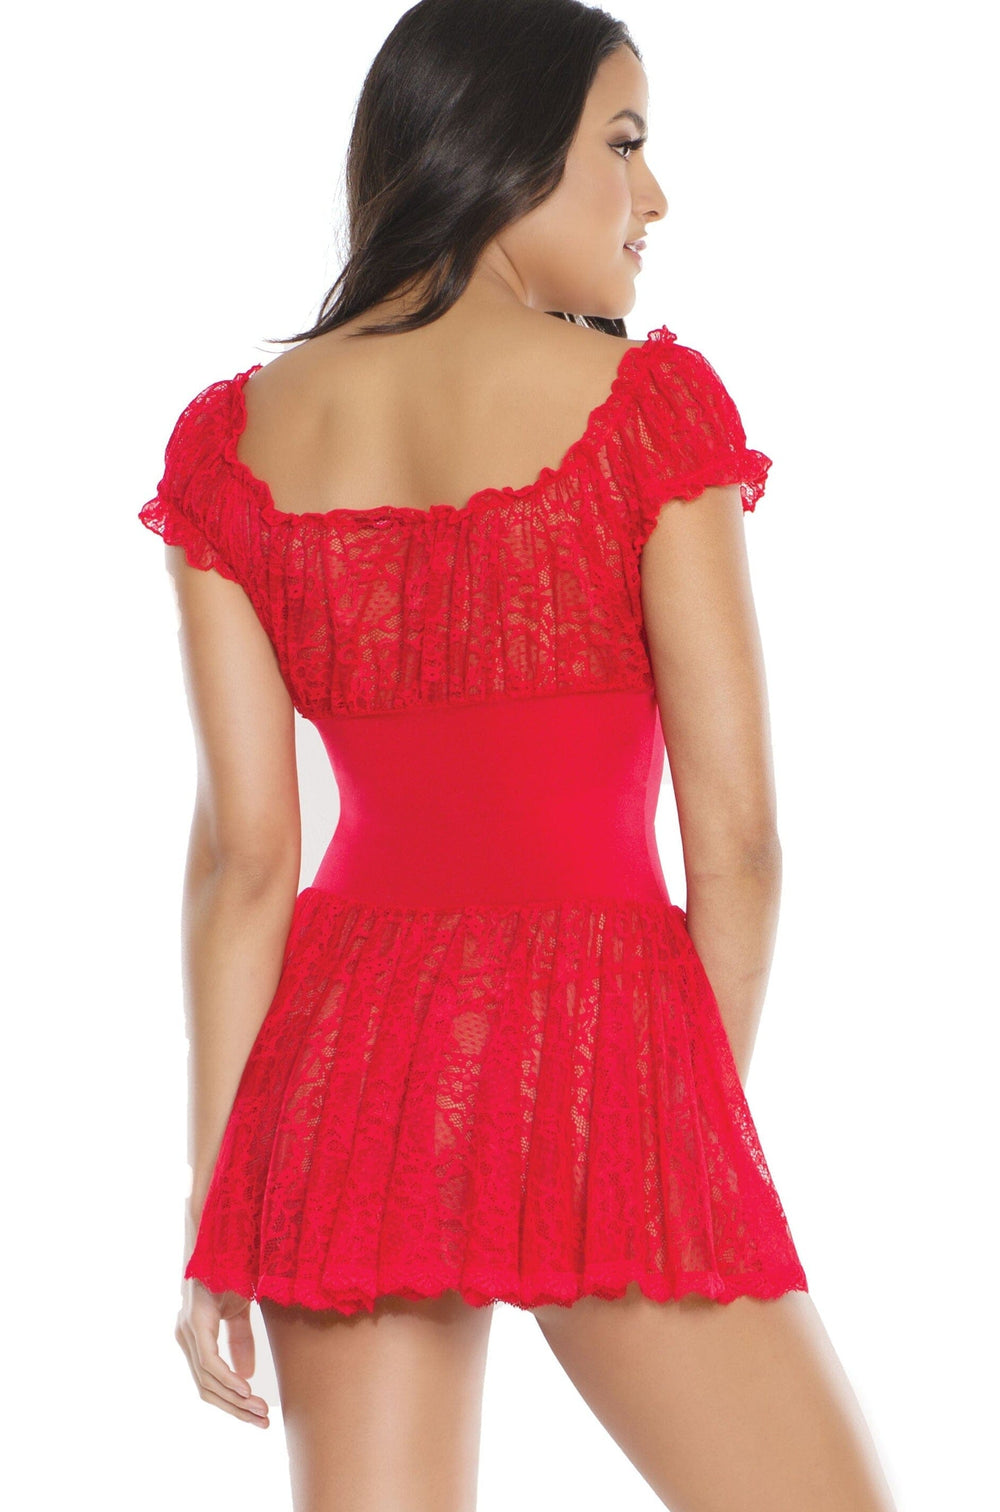 2 Pc. Stretch Lace Babydoll With Stretch Knit Waistband & Lace Trimmed Skirt-Babydolls-Coquette-Red-O/S-SEXYSHOES.COM